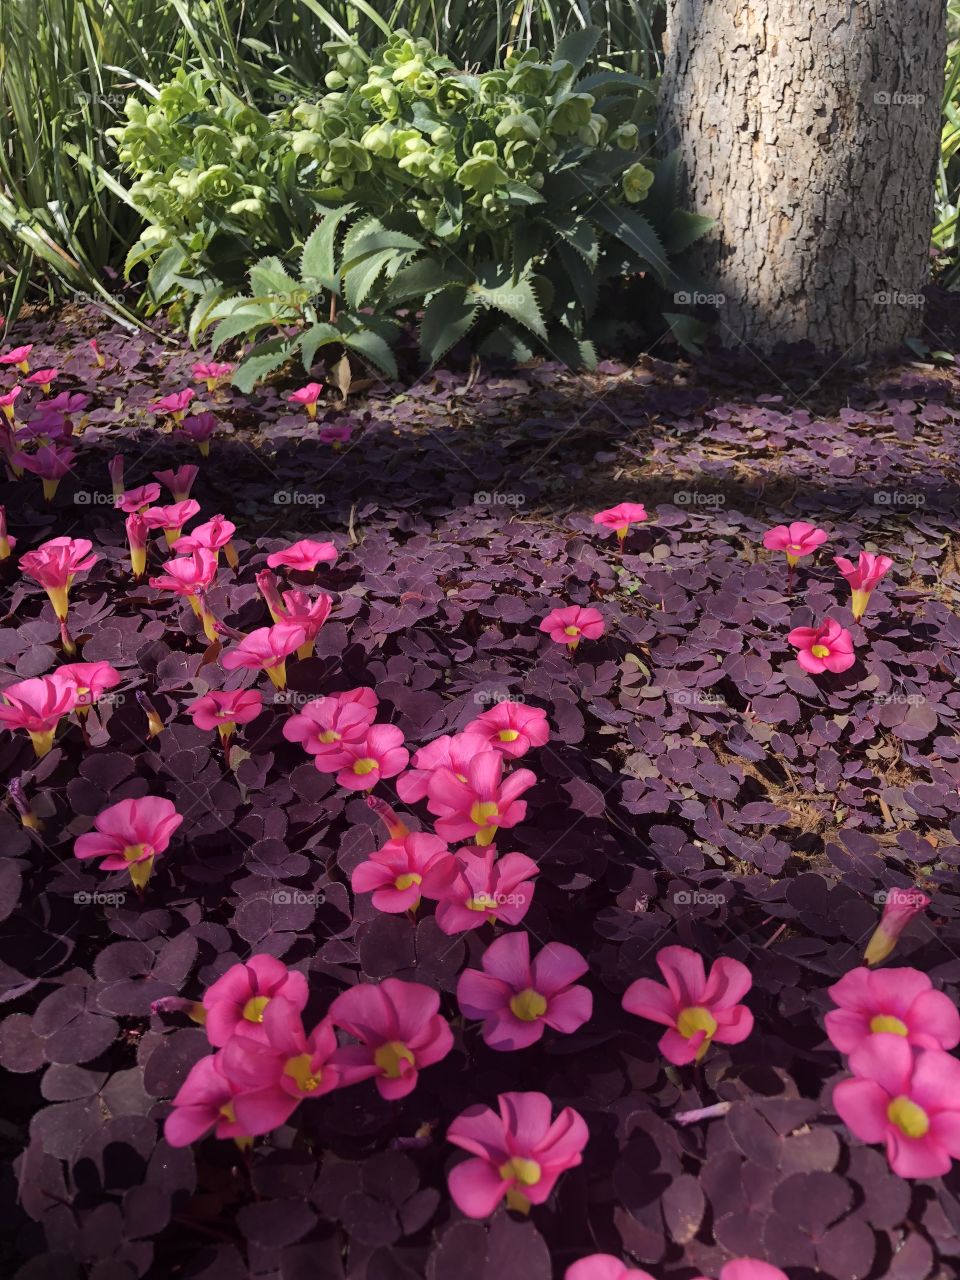 Pink flower carpet with clovers